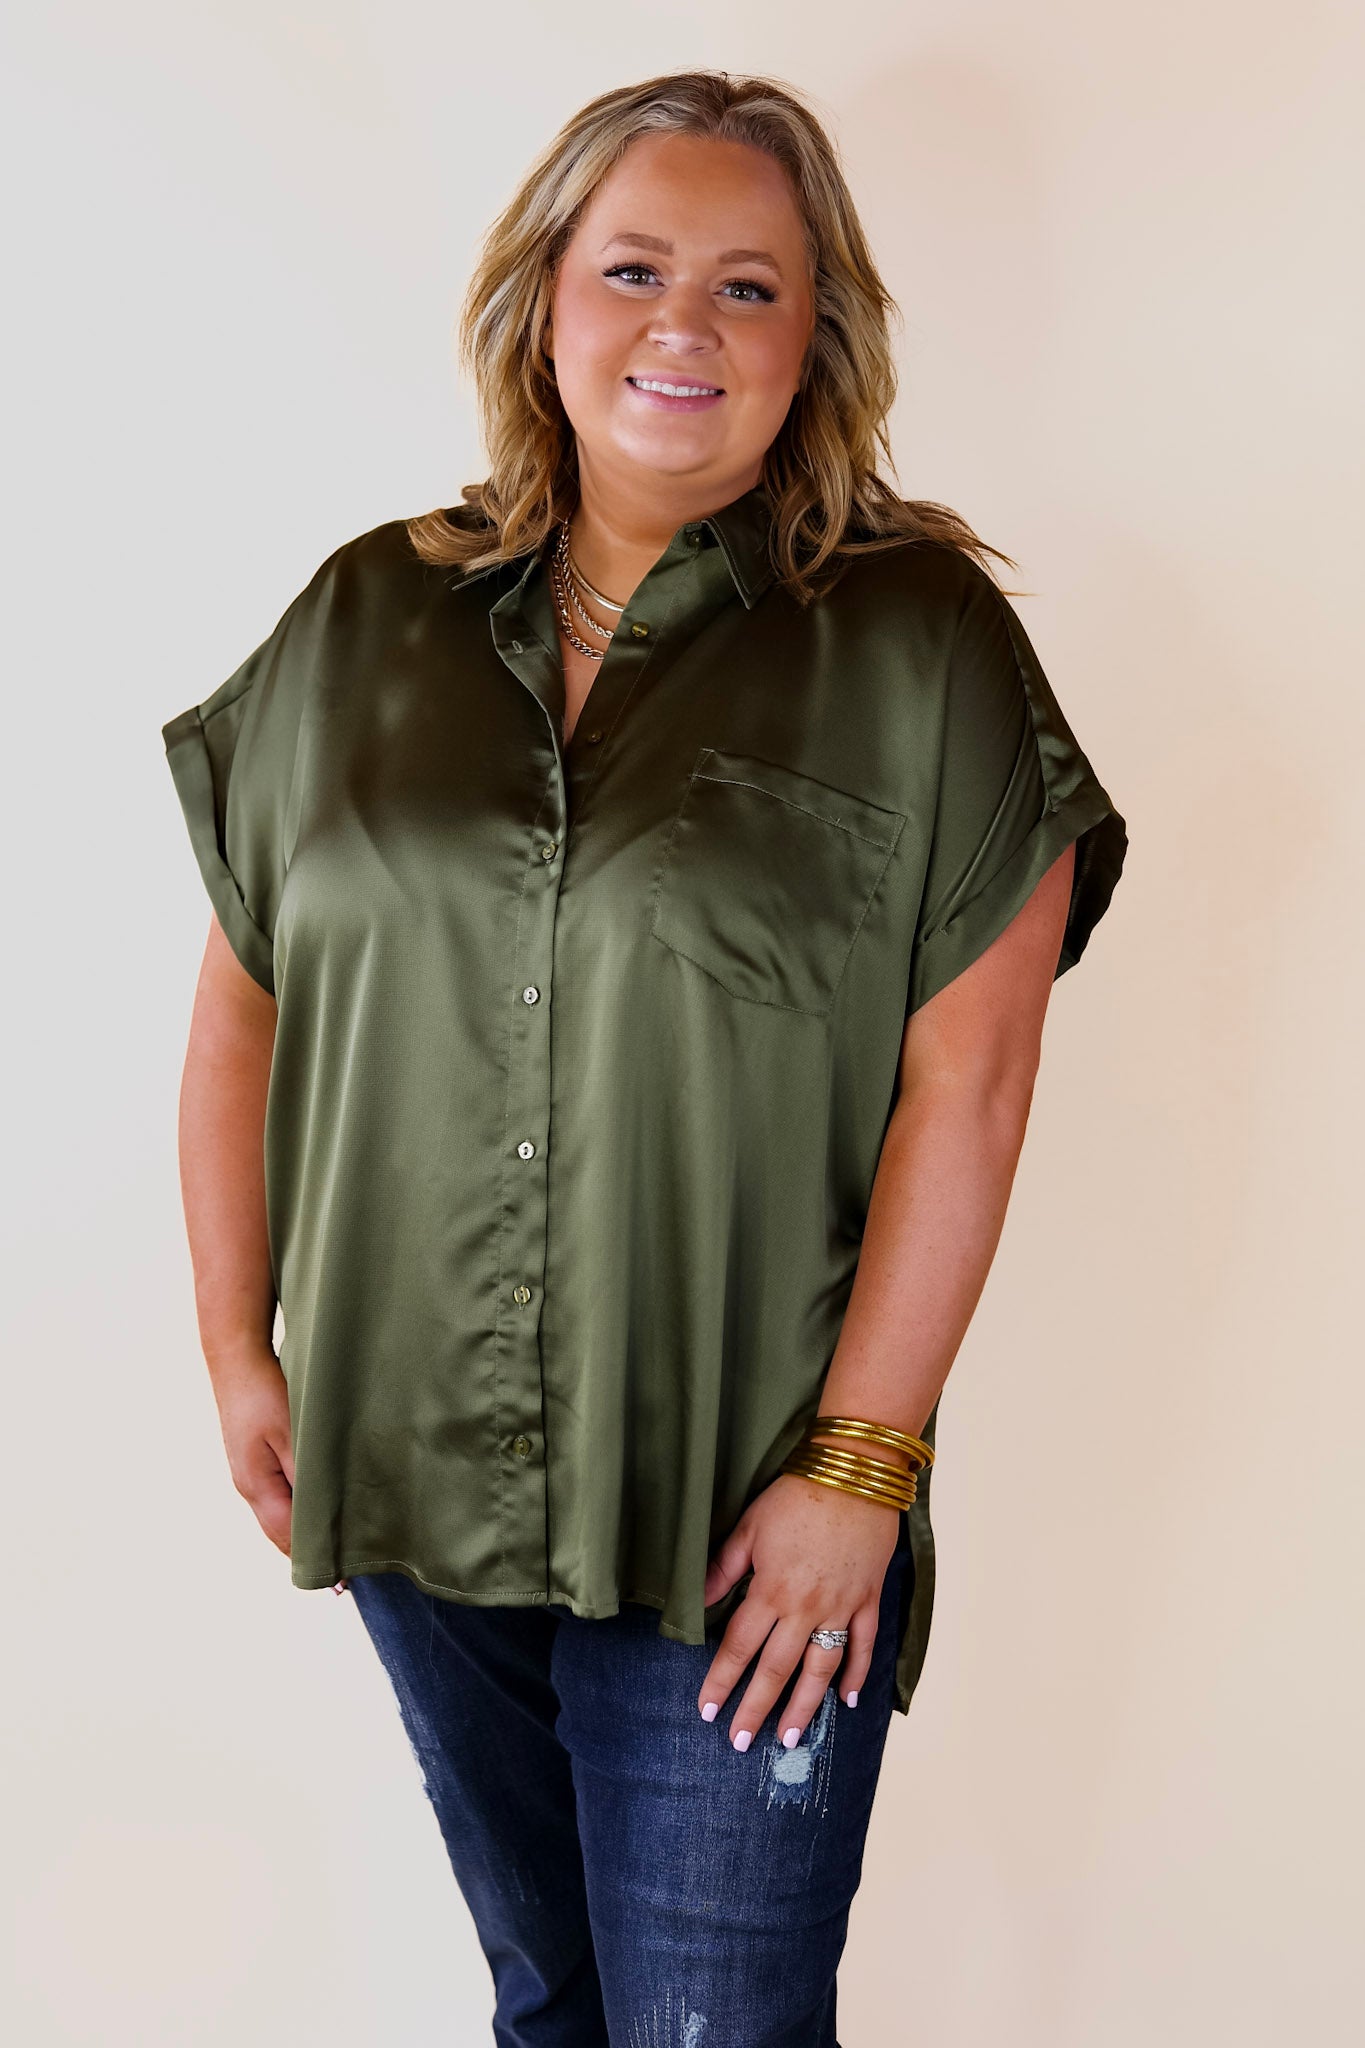 Free To Be Fab Button Up Short Sleeve Top in Olive Green - Giddy Up Glamour Boutique